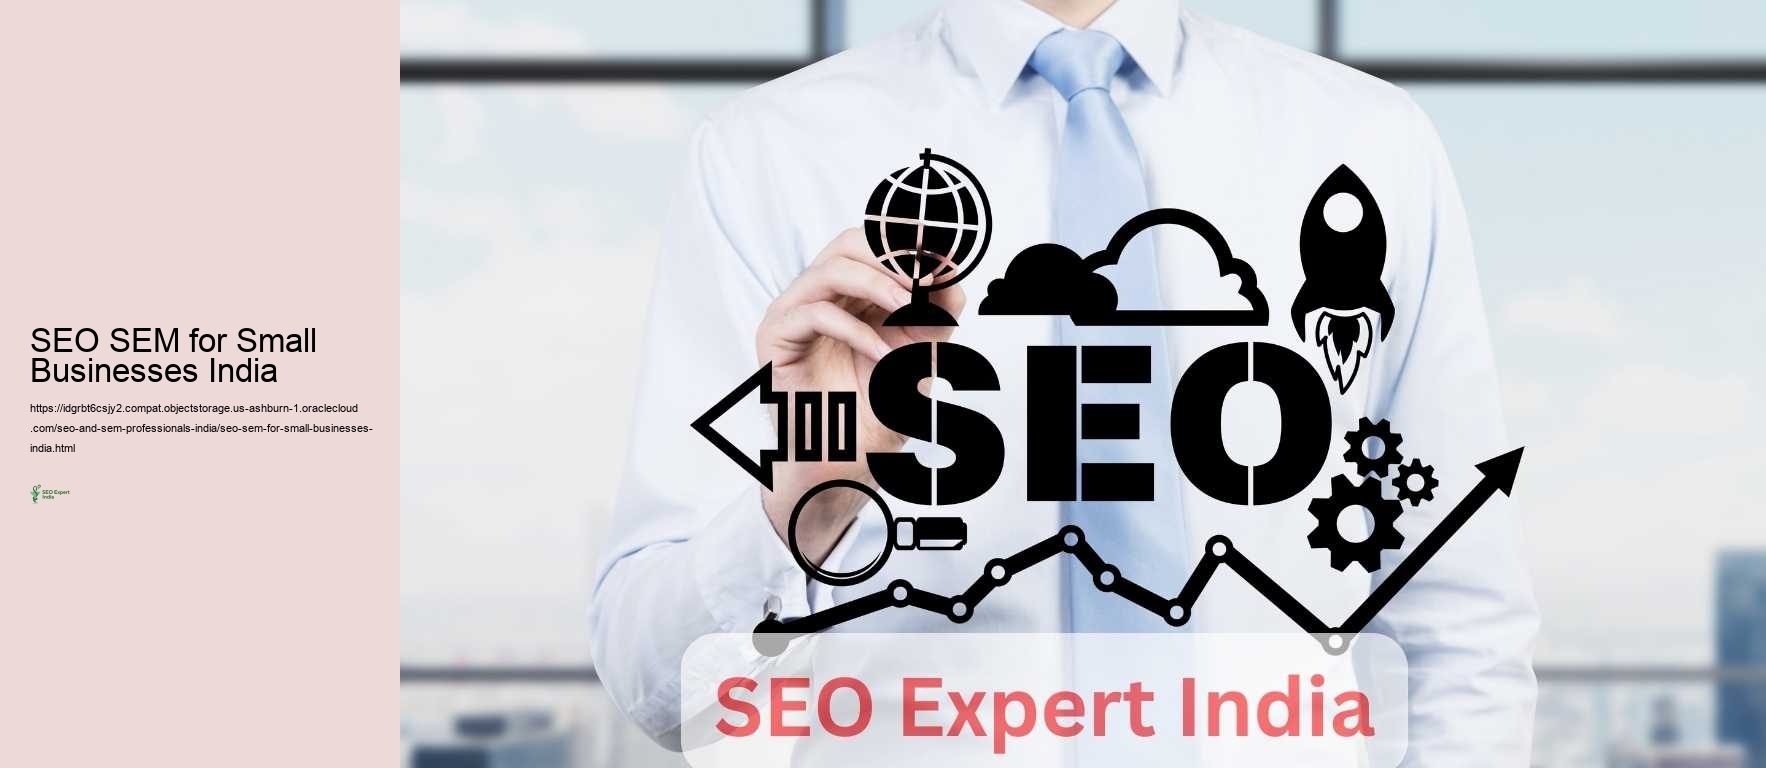 SEO SEM for Small Businesses India